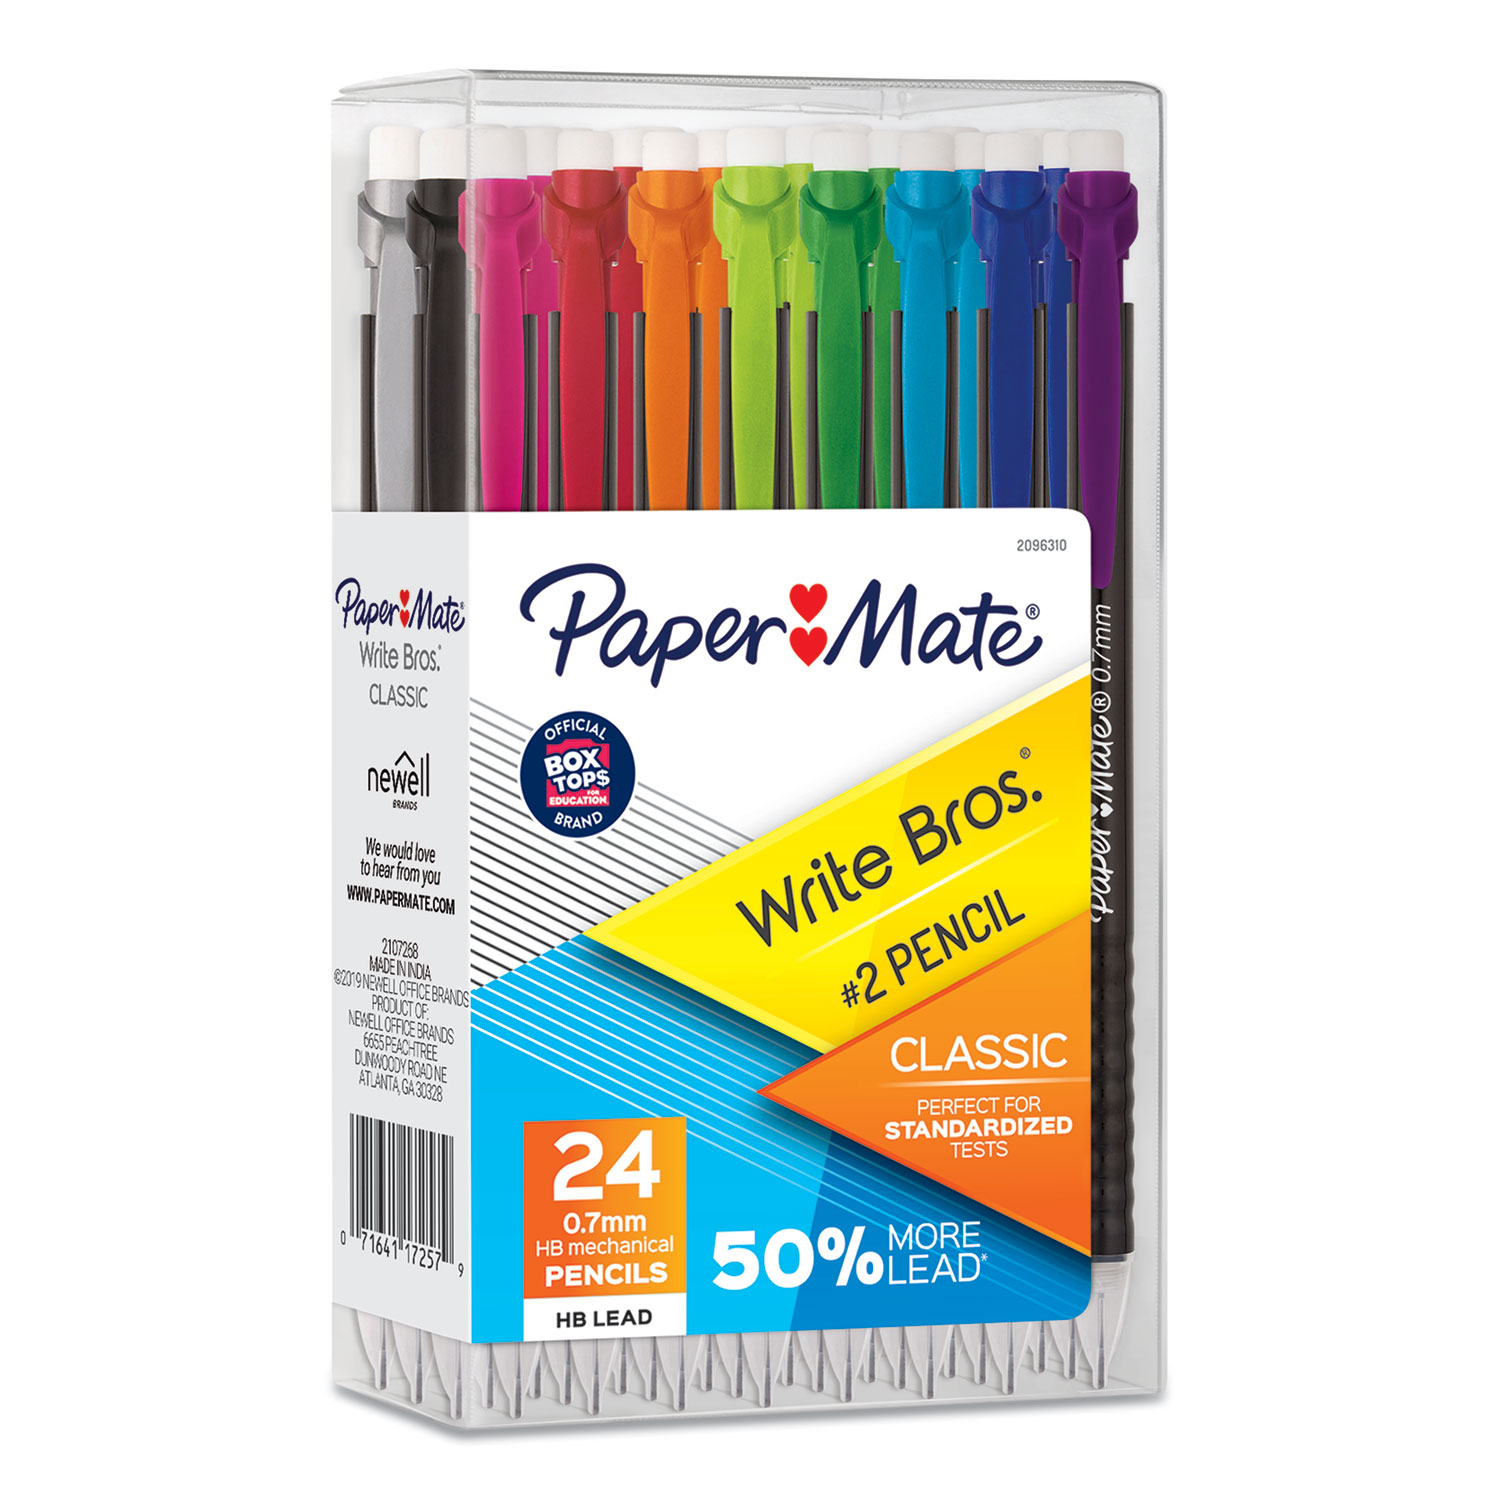  Paper Mate 2096310 Write Bros Mechanical Pencil, 0.7 mm, HB (#2), Black Lead, Black Barrel with Assorted Clip Colors, 24/Box (PAP24430943) 